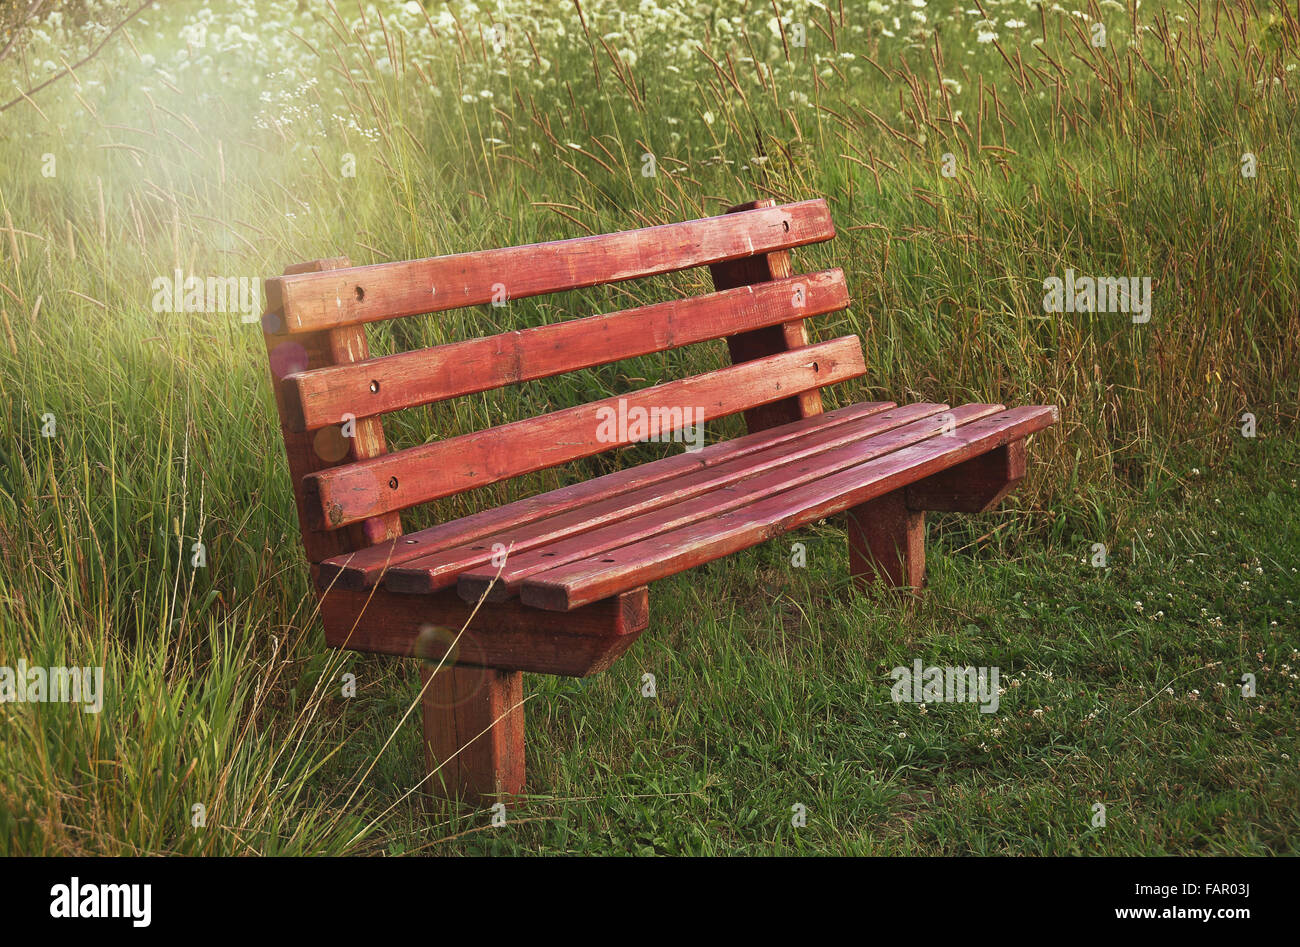 Wooden bench in summer field of wildflowers with sun flare lighting. Stock Photo